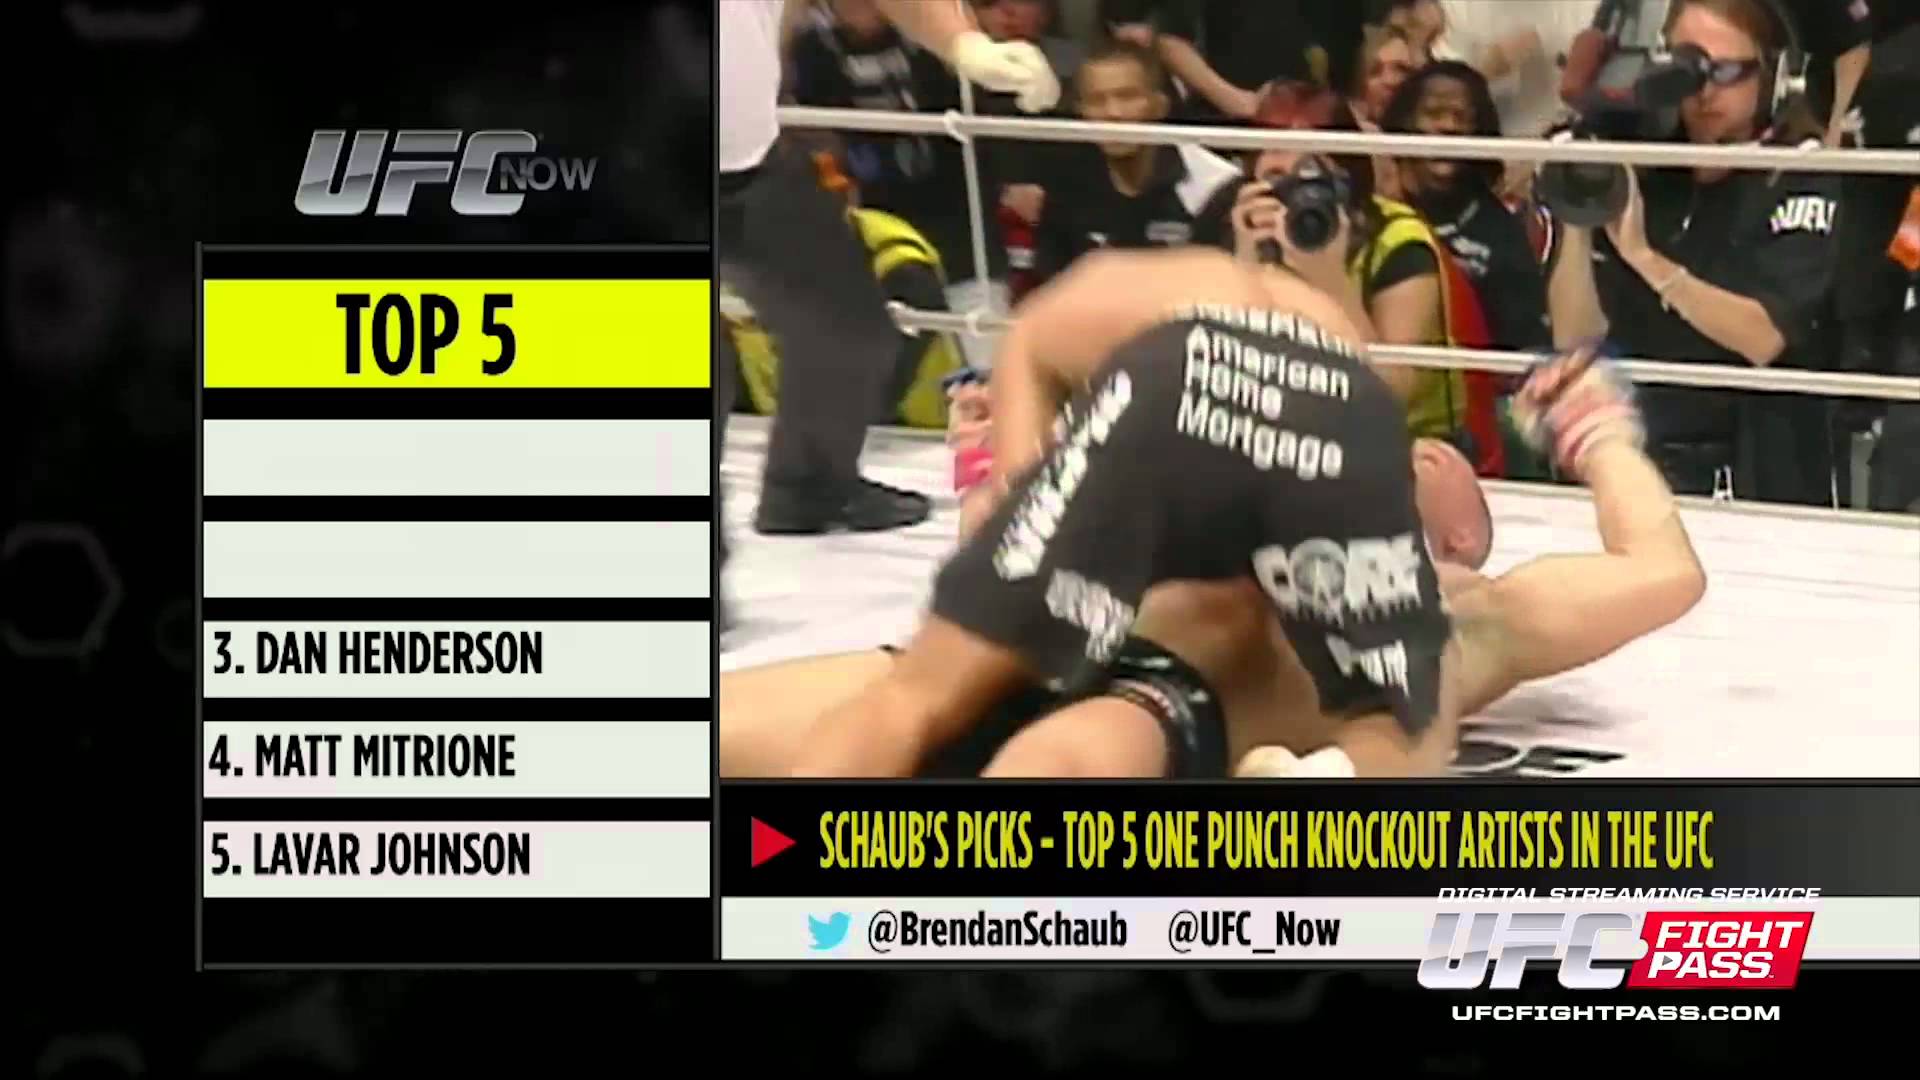 UFC Now Ep. 212: Top 5 One Punch Knockout Artists MMA Video1920 x 1080